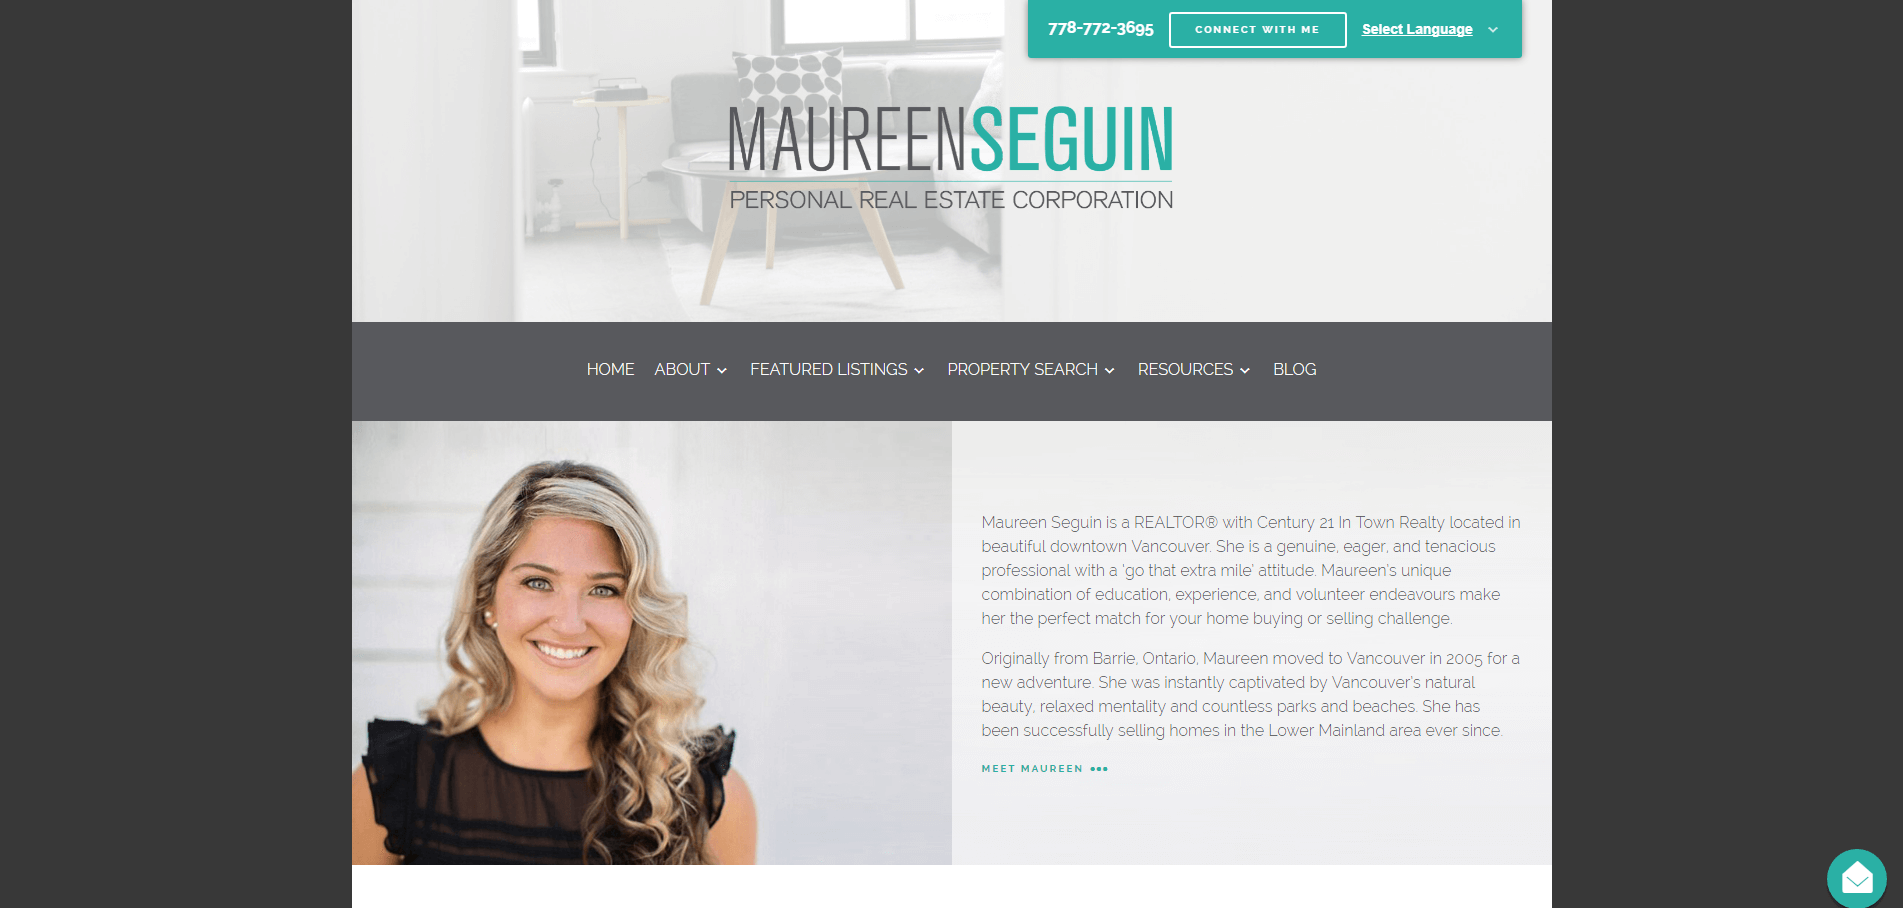  Unbelievable!  We made a list of the 101 best real estate websites.  We reviewed each site and ranked them 1-101.  Here's maureenseguin.com.  Want to see who made the list? 